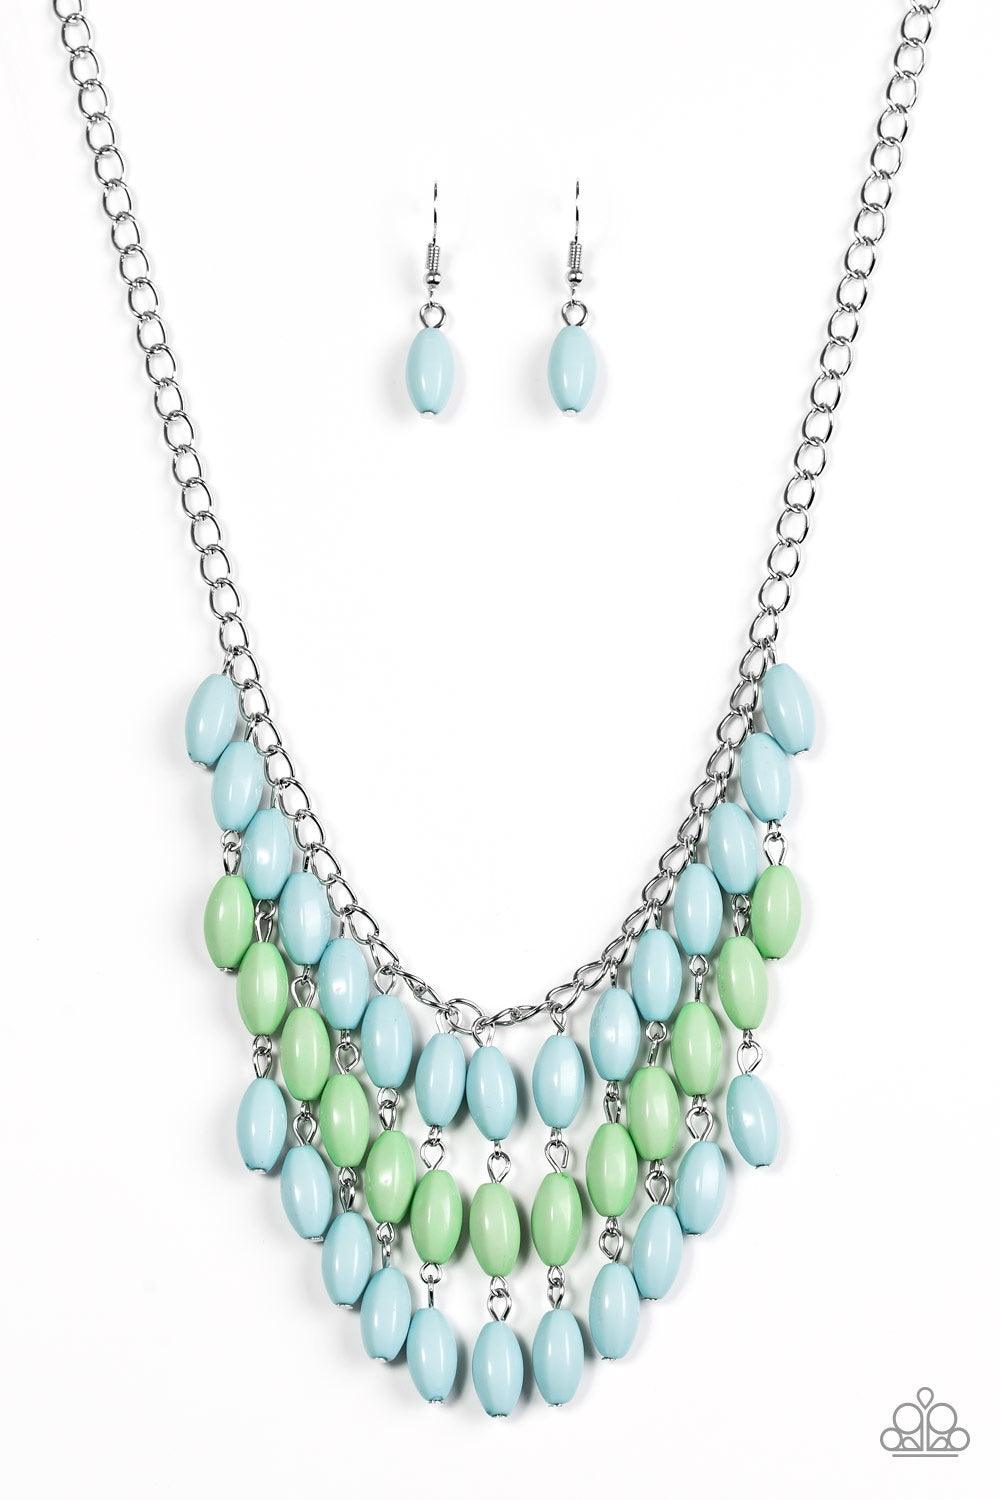 Paparazzi Accessories Delhi Diva - Blue Faceted blue and green beads cascade from the bottom of a shimmery silver chain, creating a flirty fringe below the collar. Features an adjustable clasp closure. Jewelry